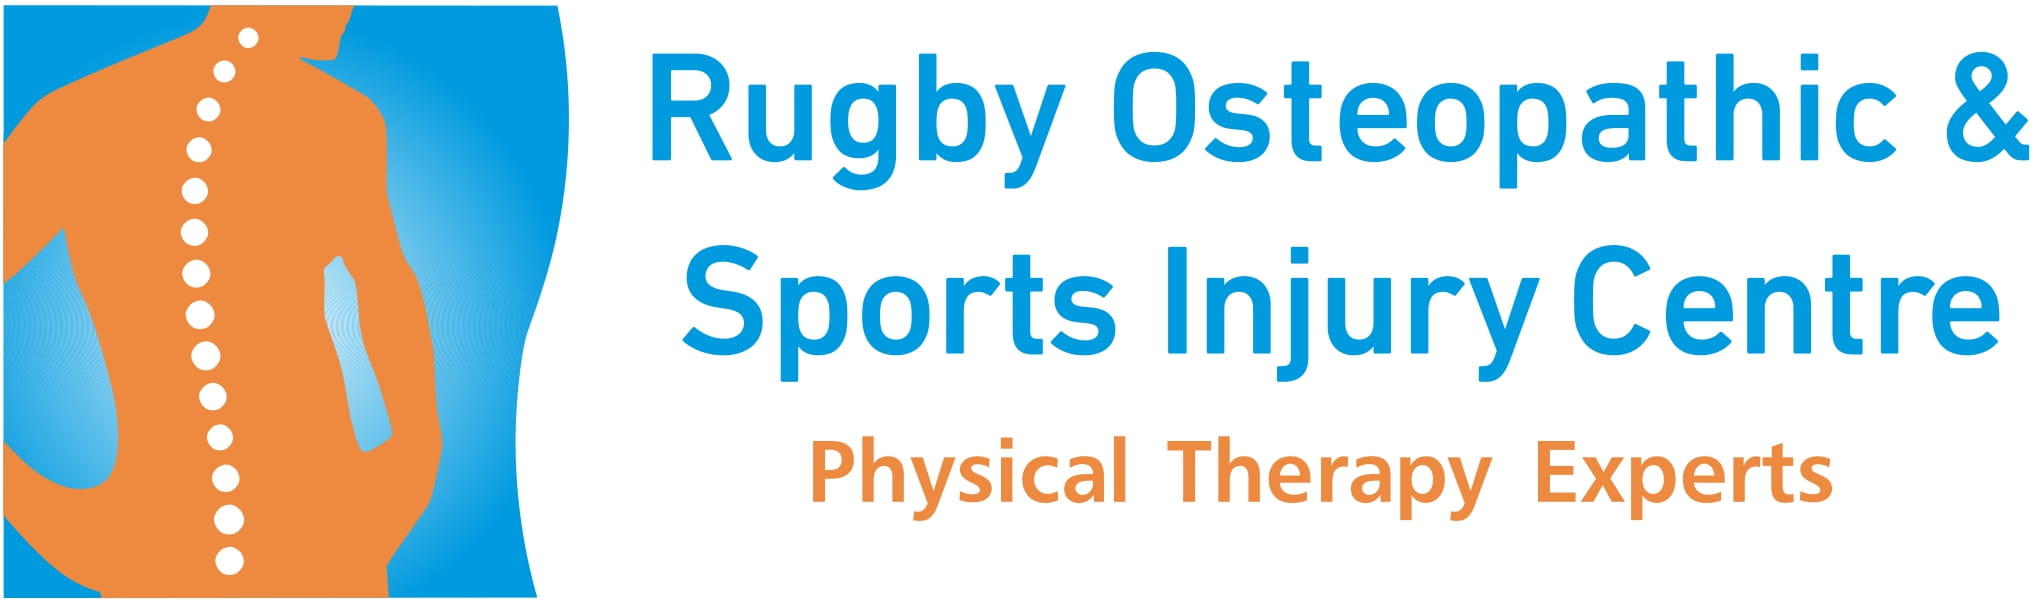 Rugby Osteopathic & Sports Injury Centre